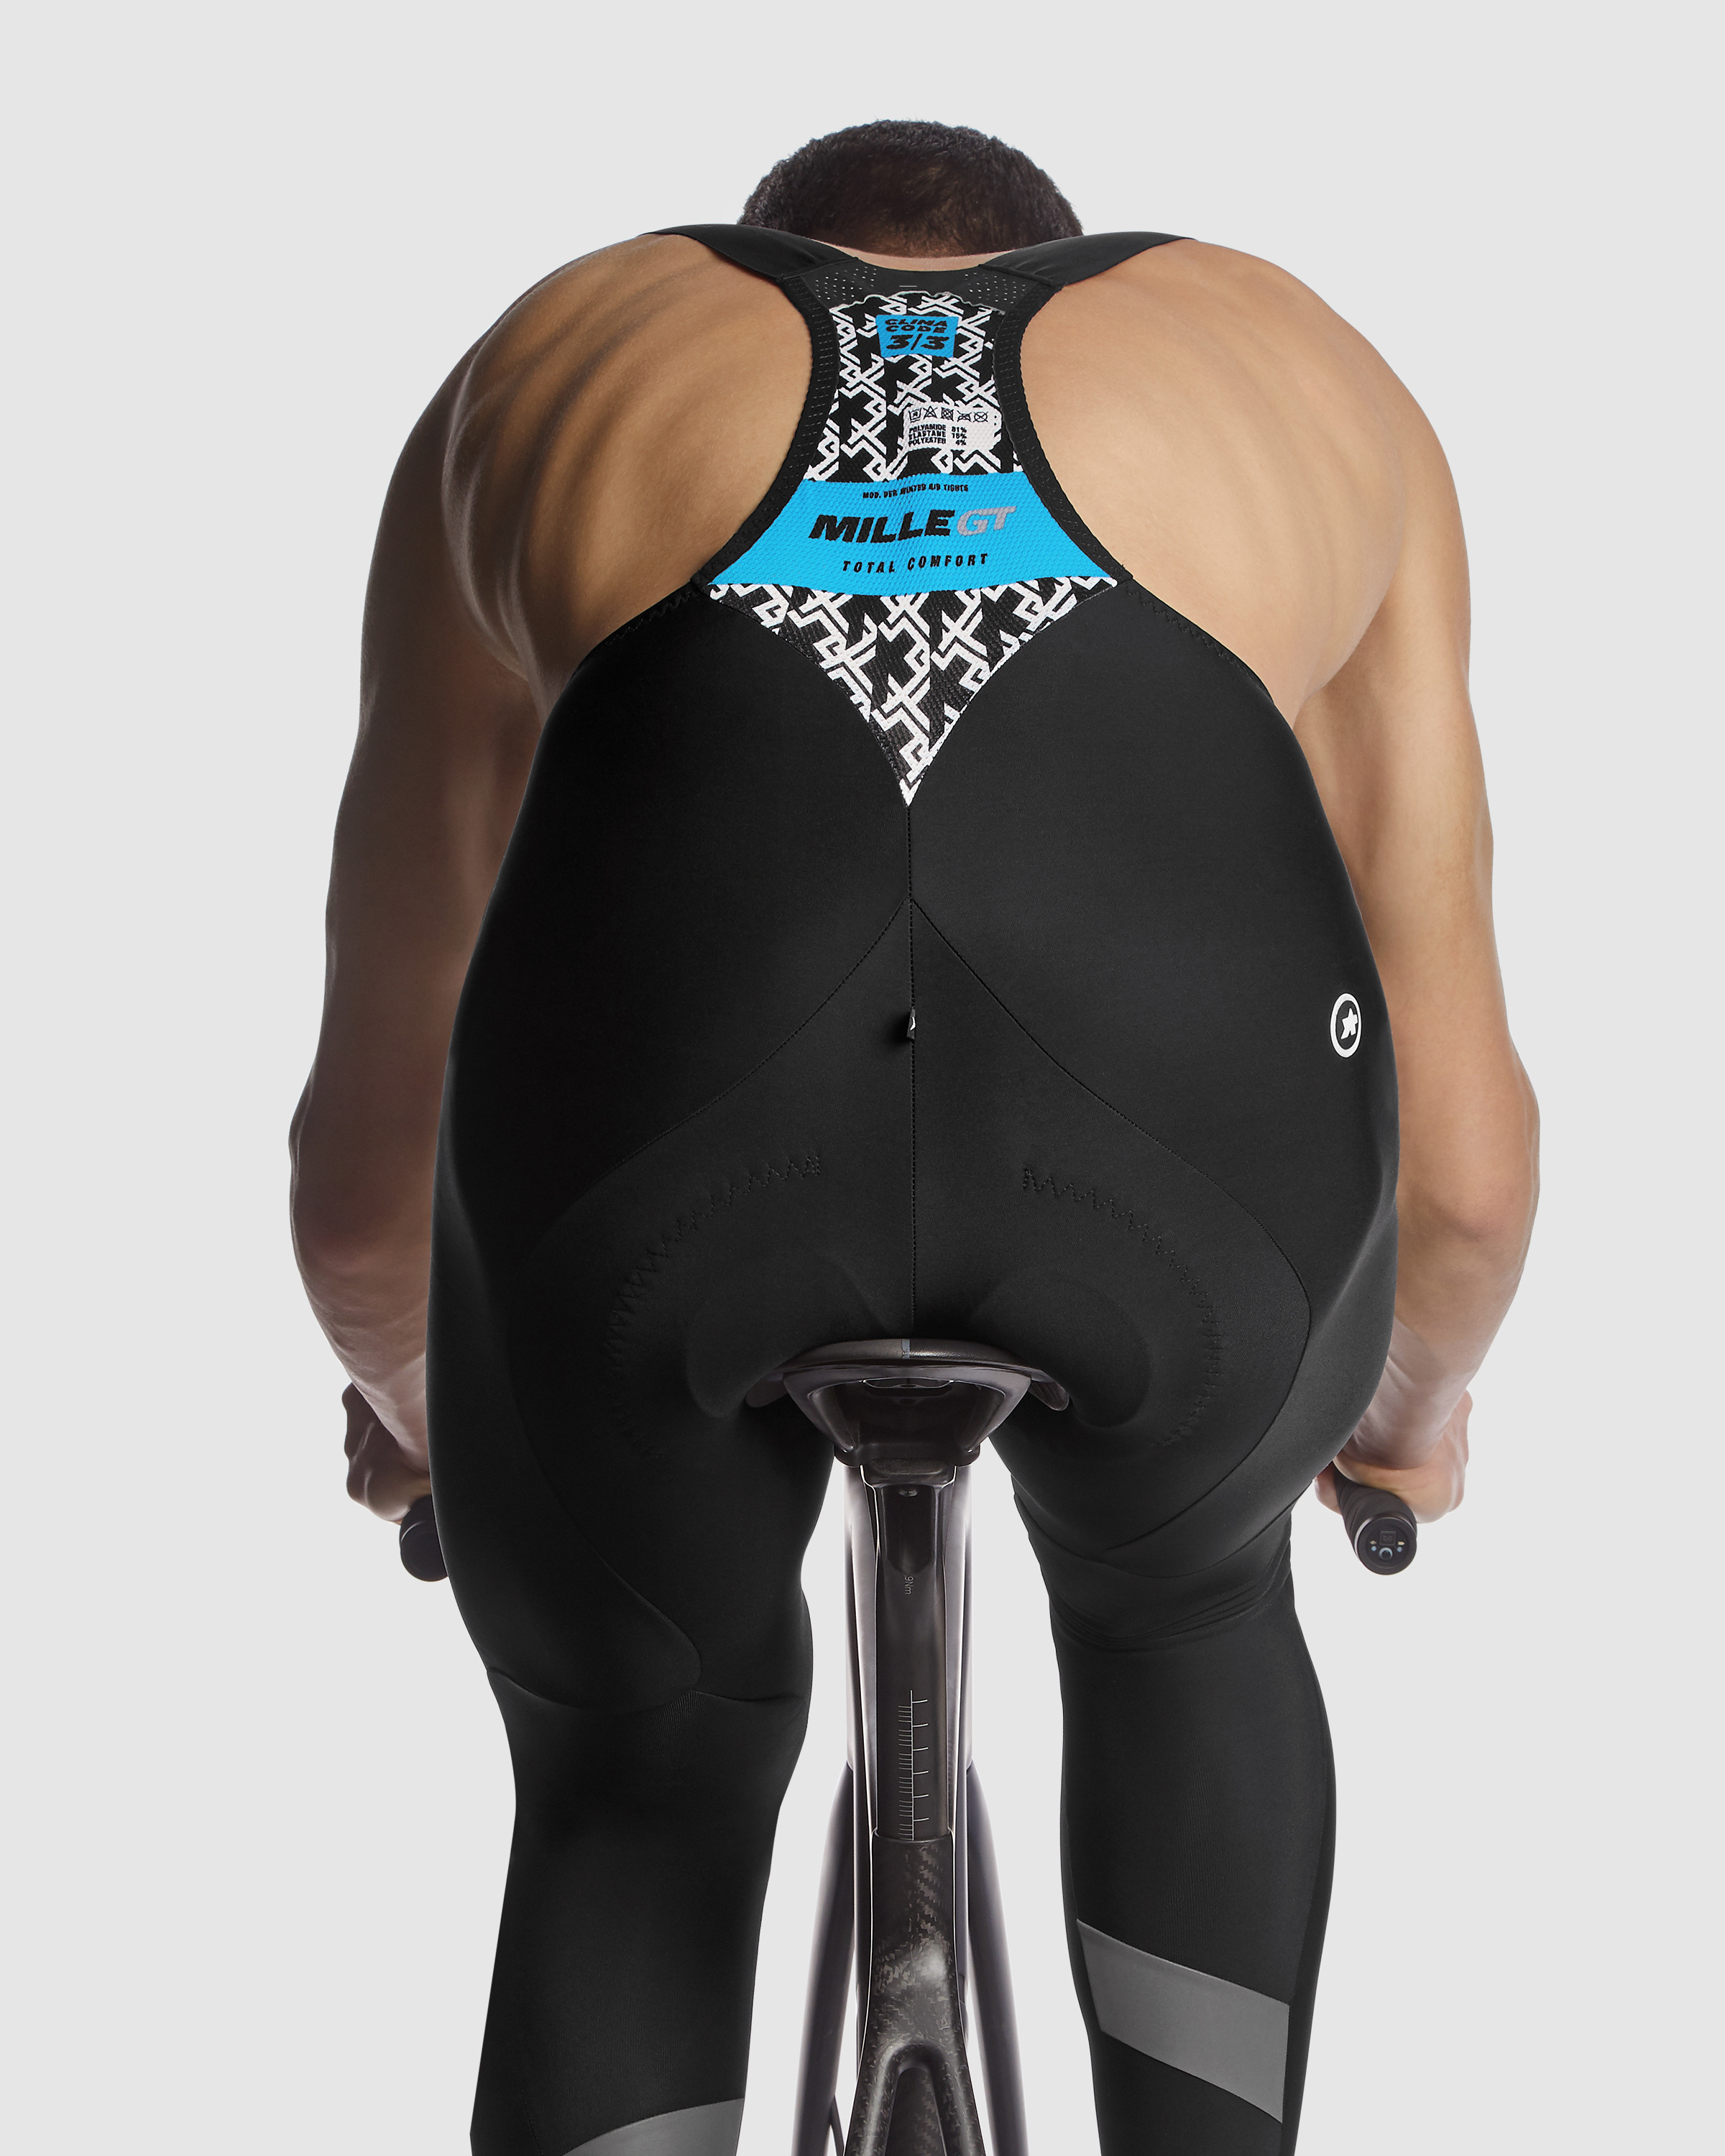 MILLE GT Winter Bib Tights - ASSOS Of Switzerland - Official Outlet